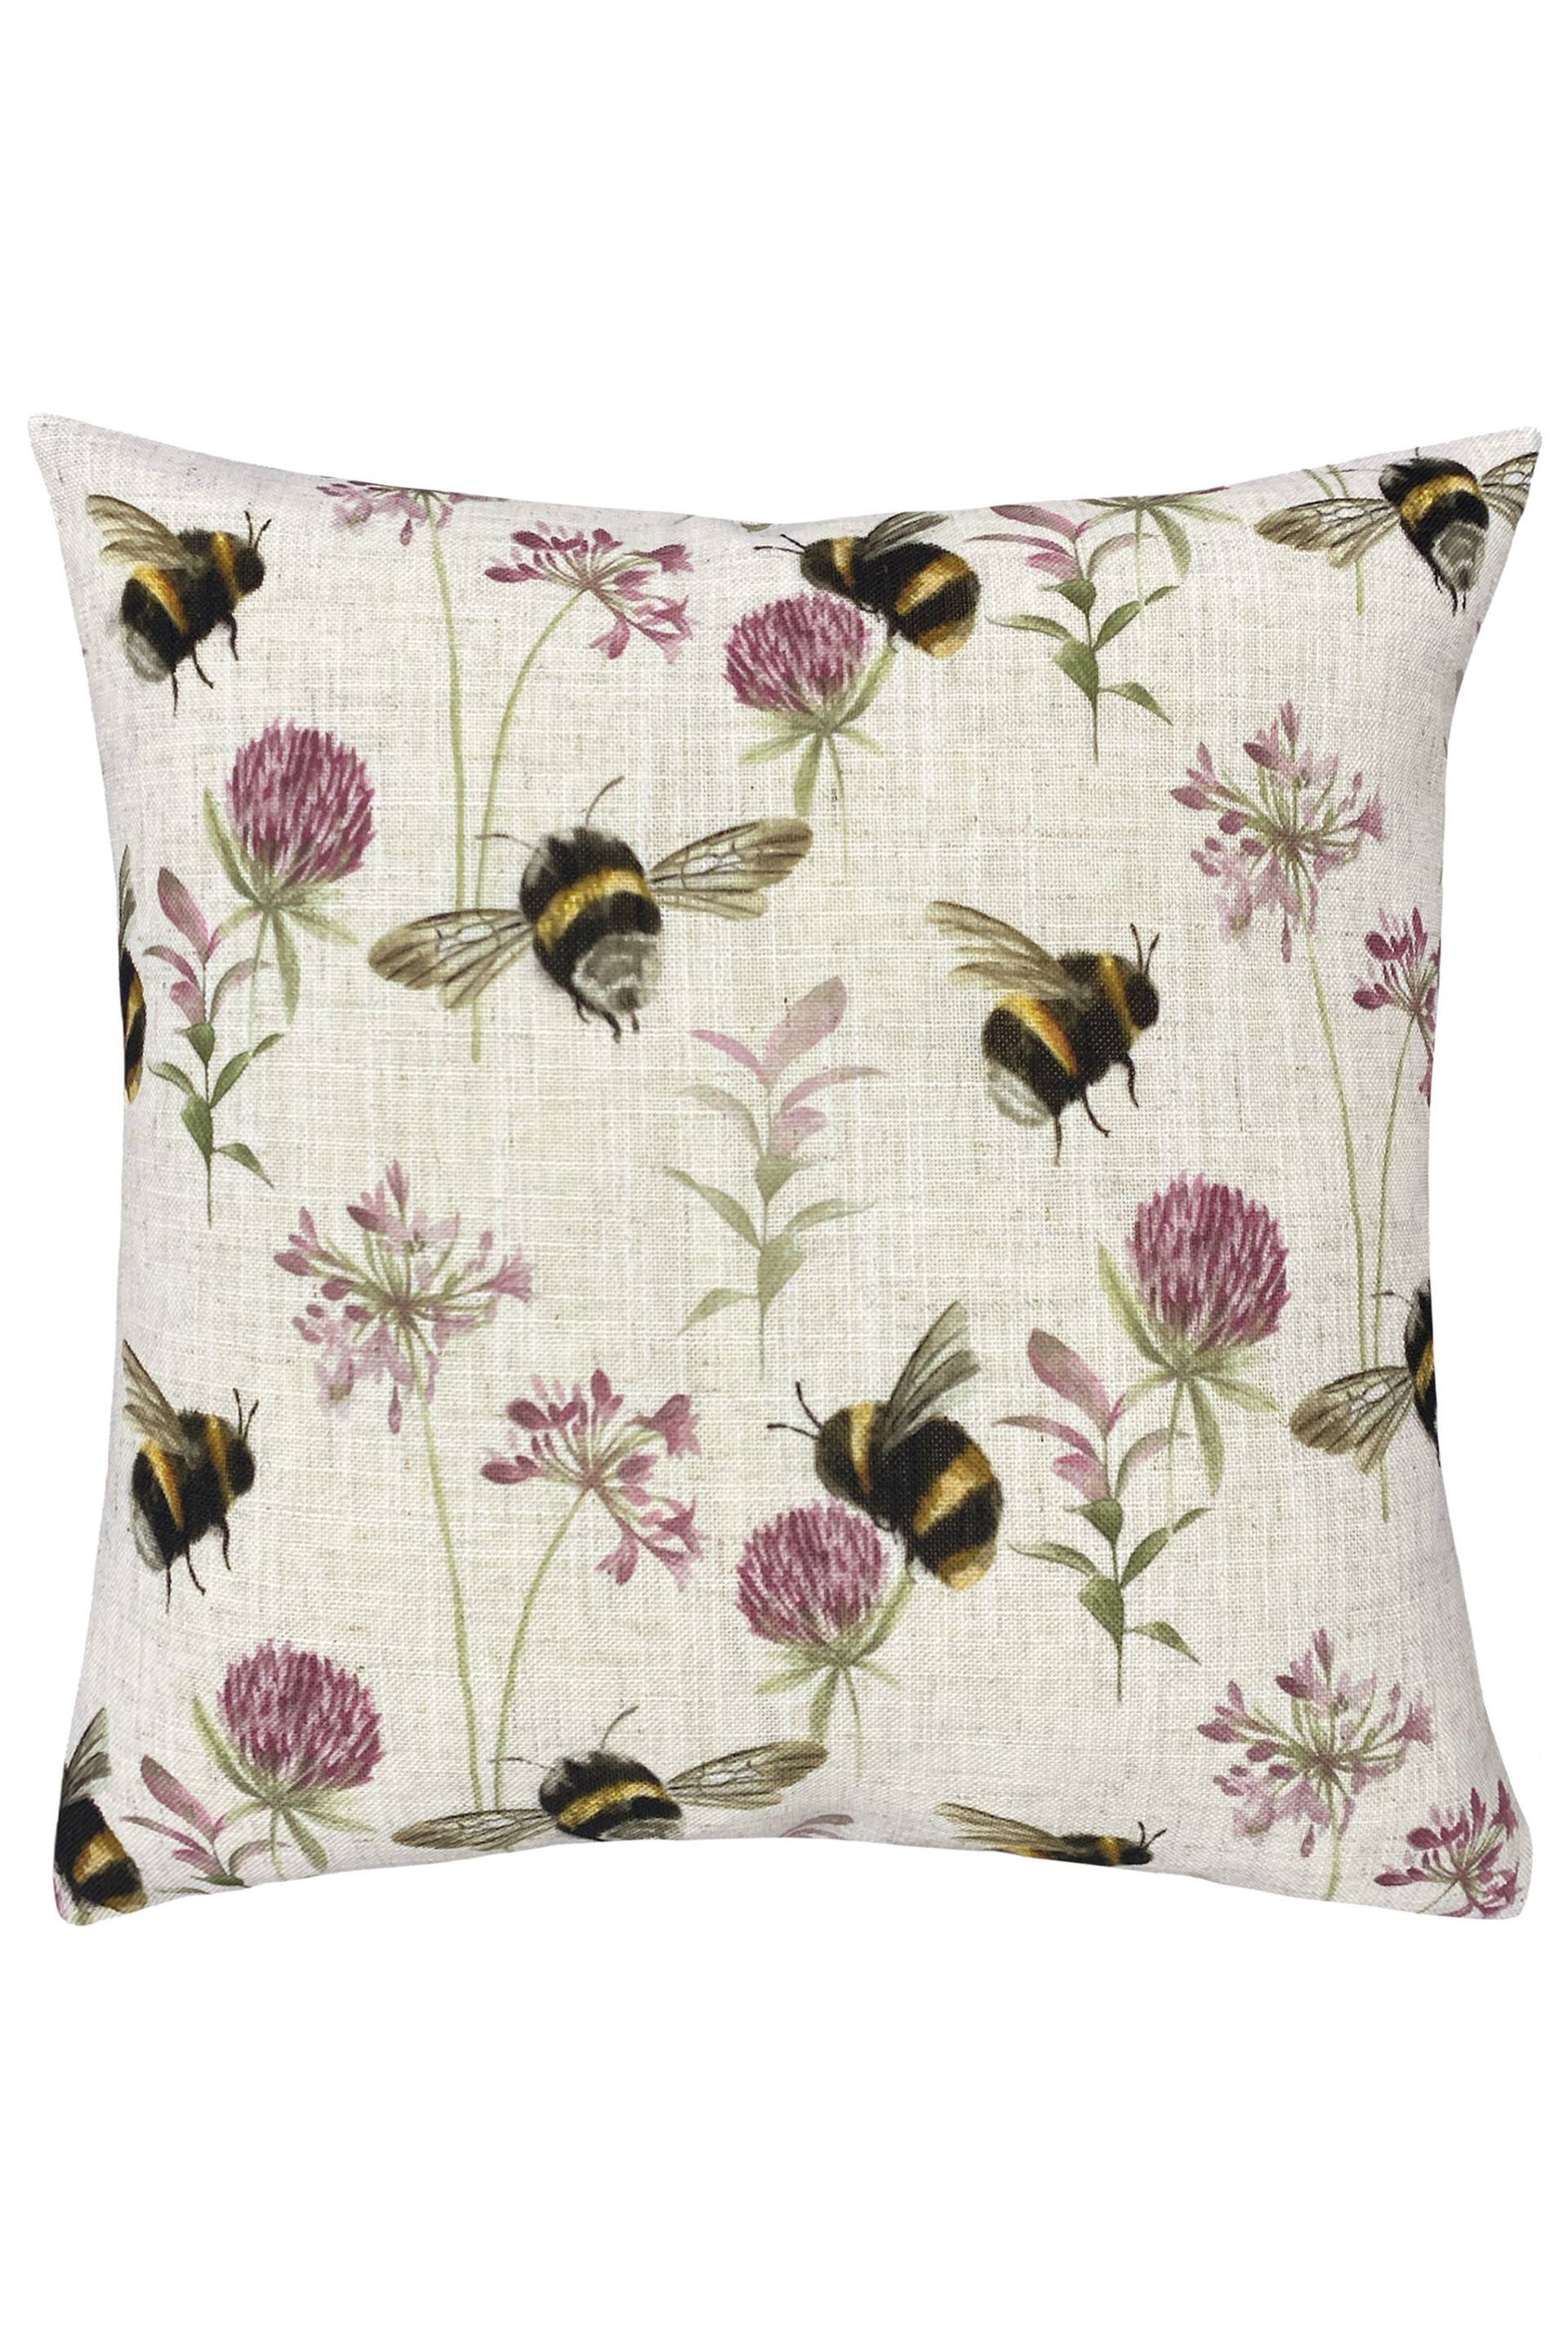 Evans Lichfield Natural Multicolour Country Bee Garden Printed Cushion - Image 2 of 5